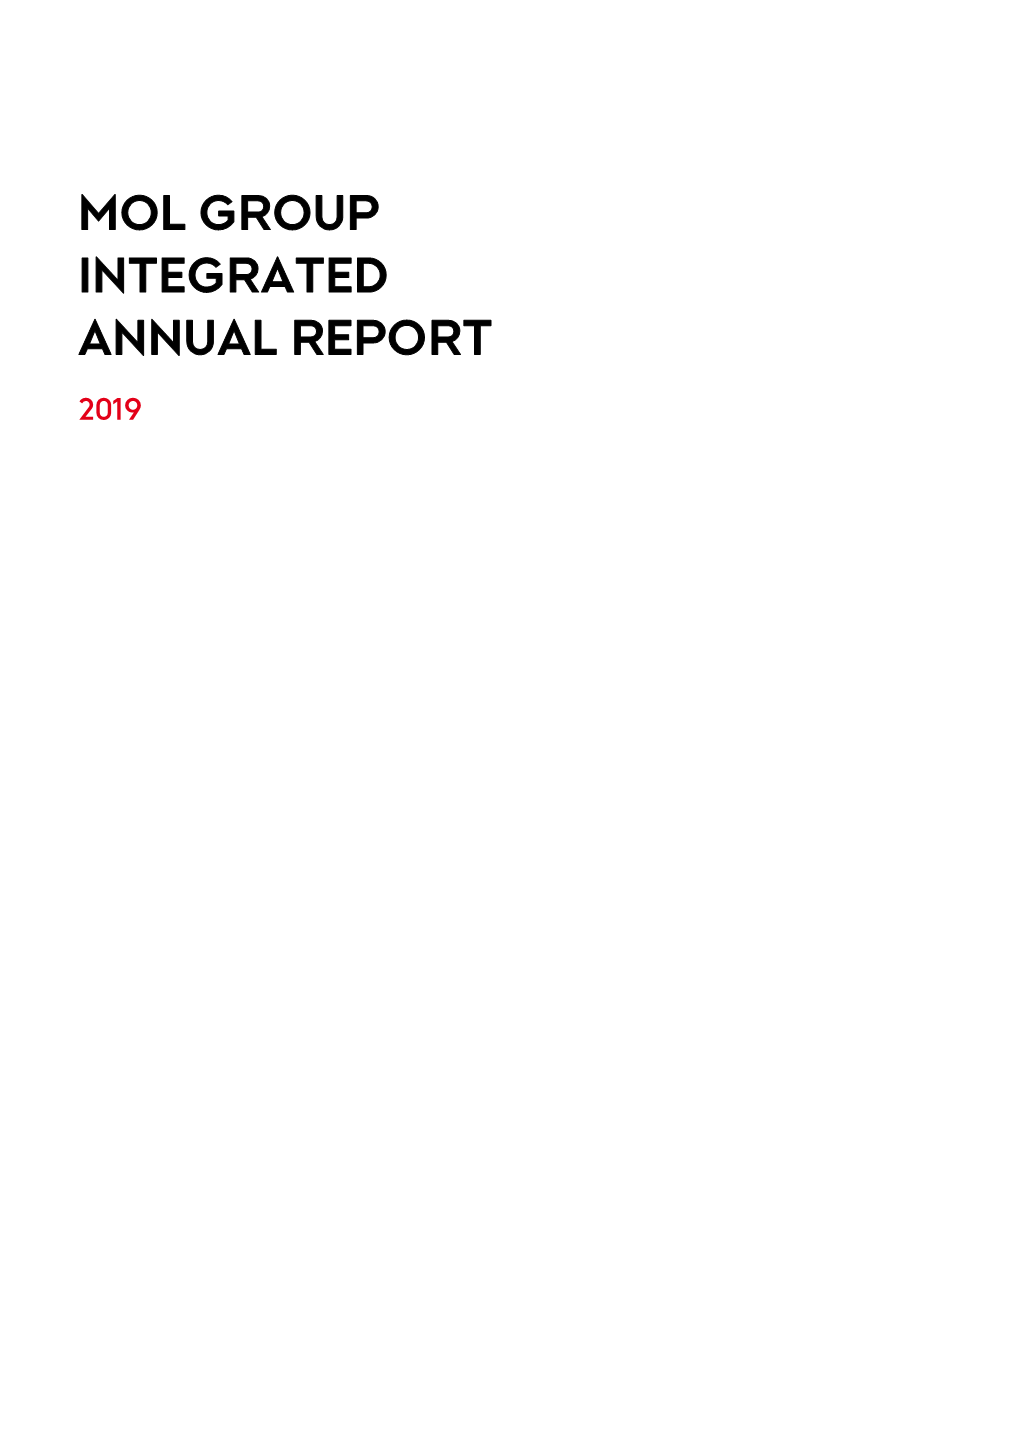 Integrated Annual Report